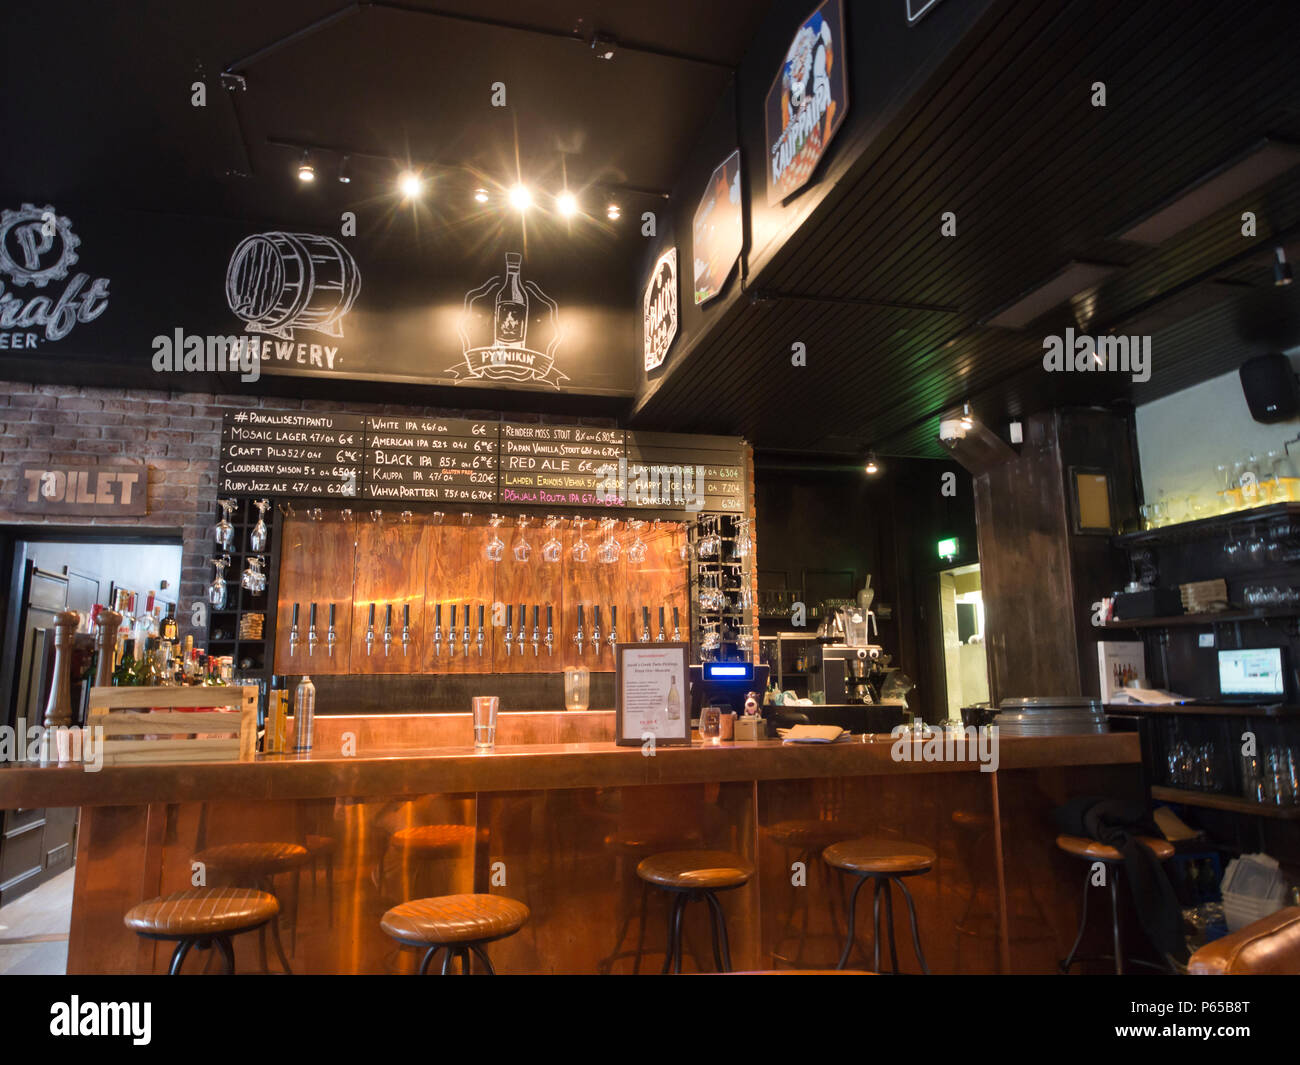 Pyynikin Brewhouse in Tampere finland, interior of pub and restaurant.  Numerous taps at the bar showing the many different beers on offer Stock  Photo - Alamy